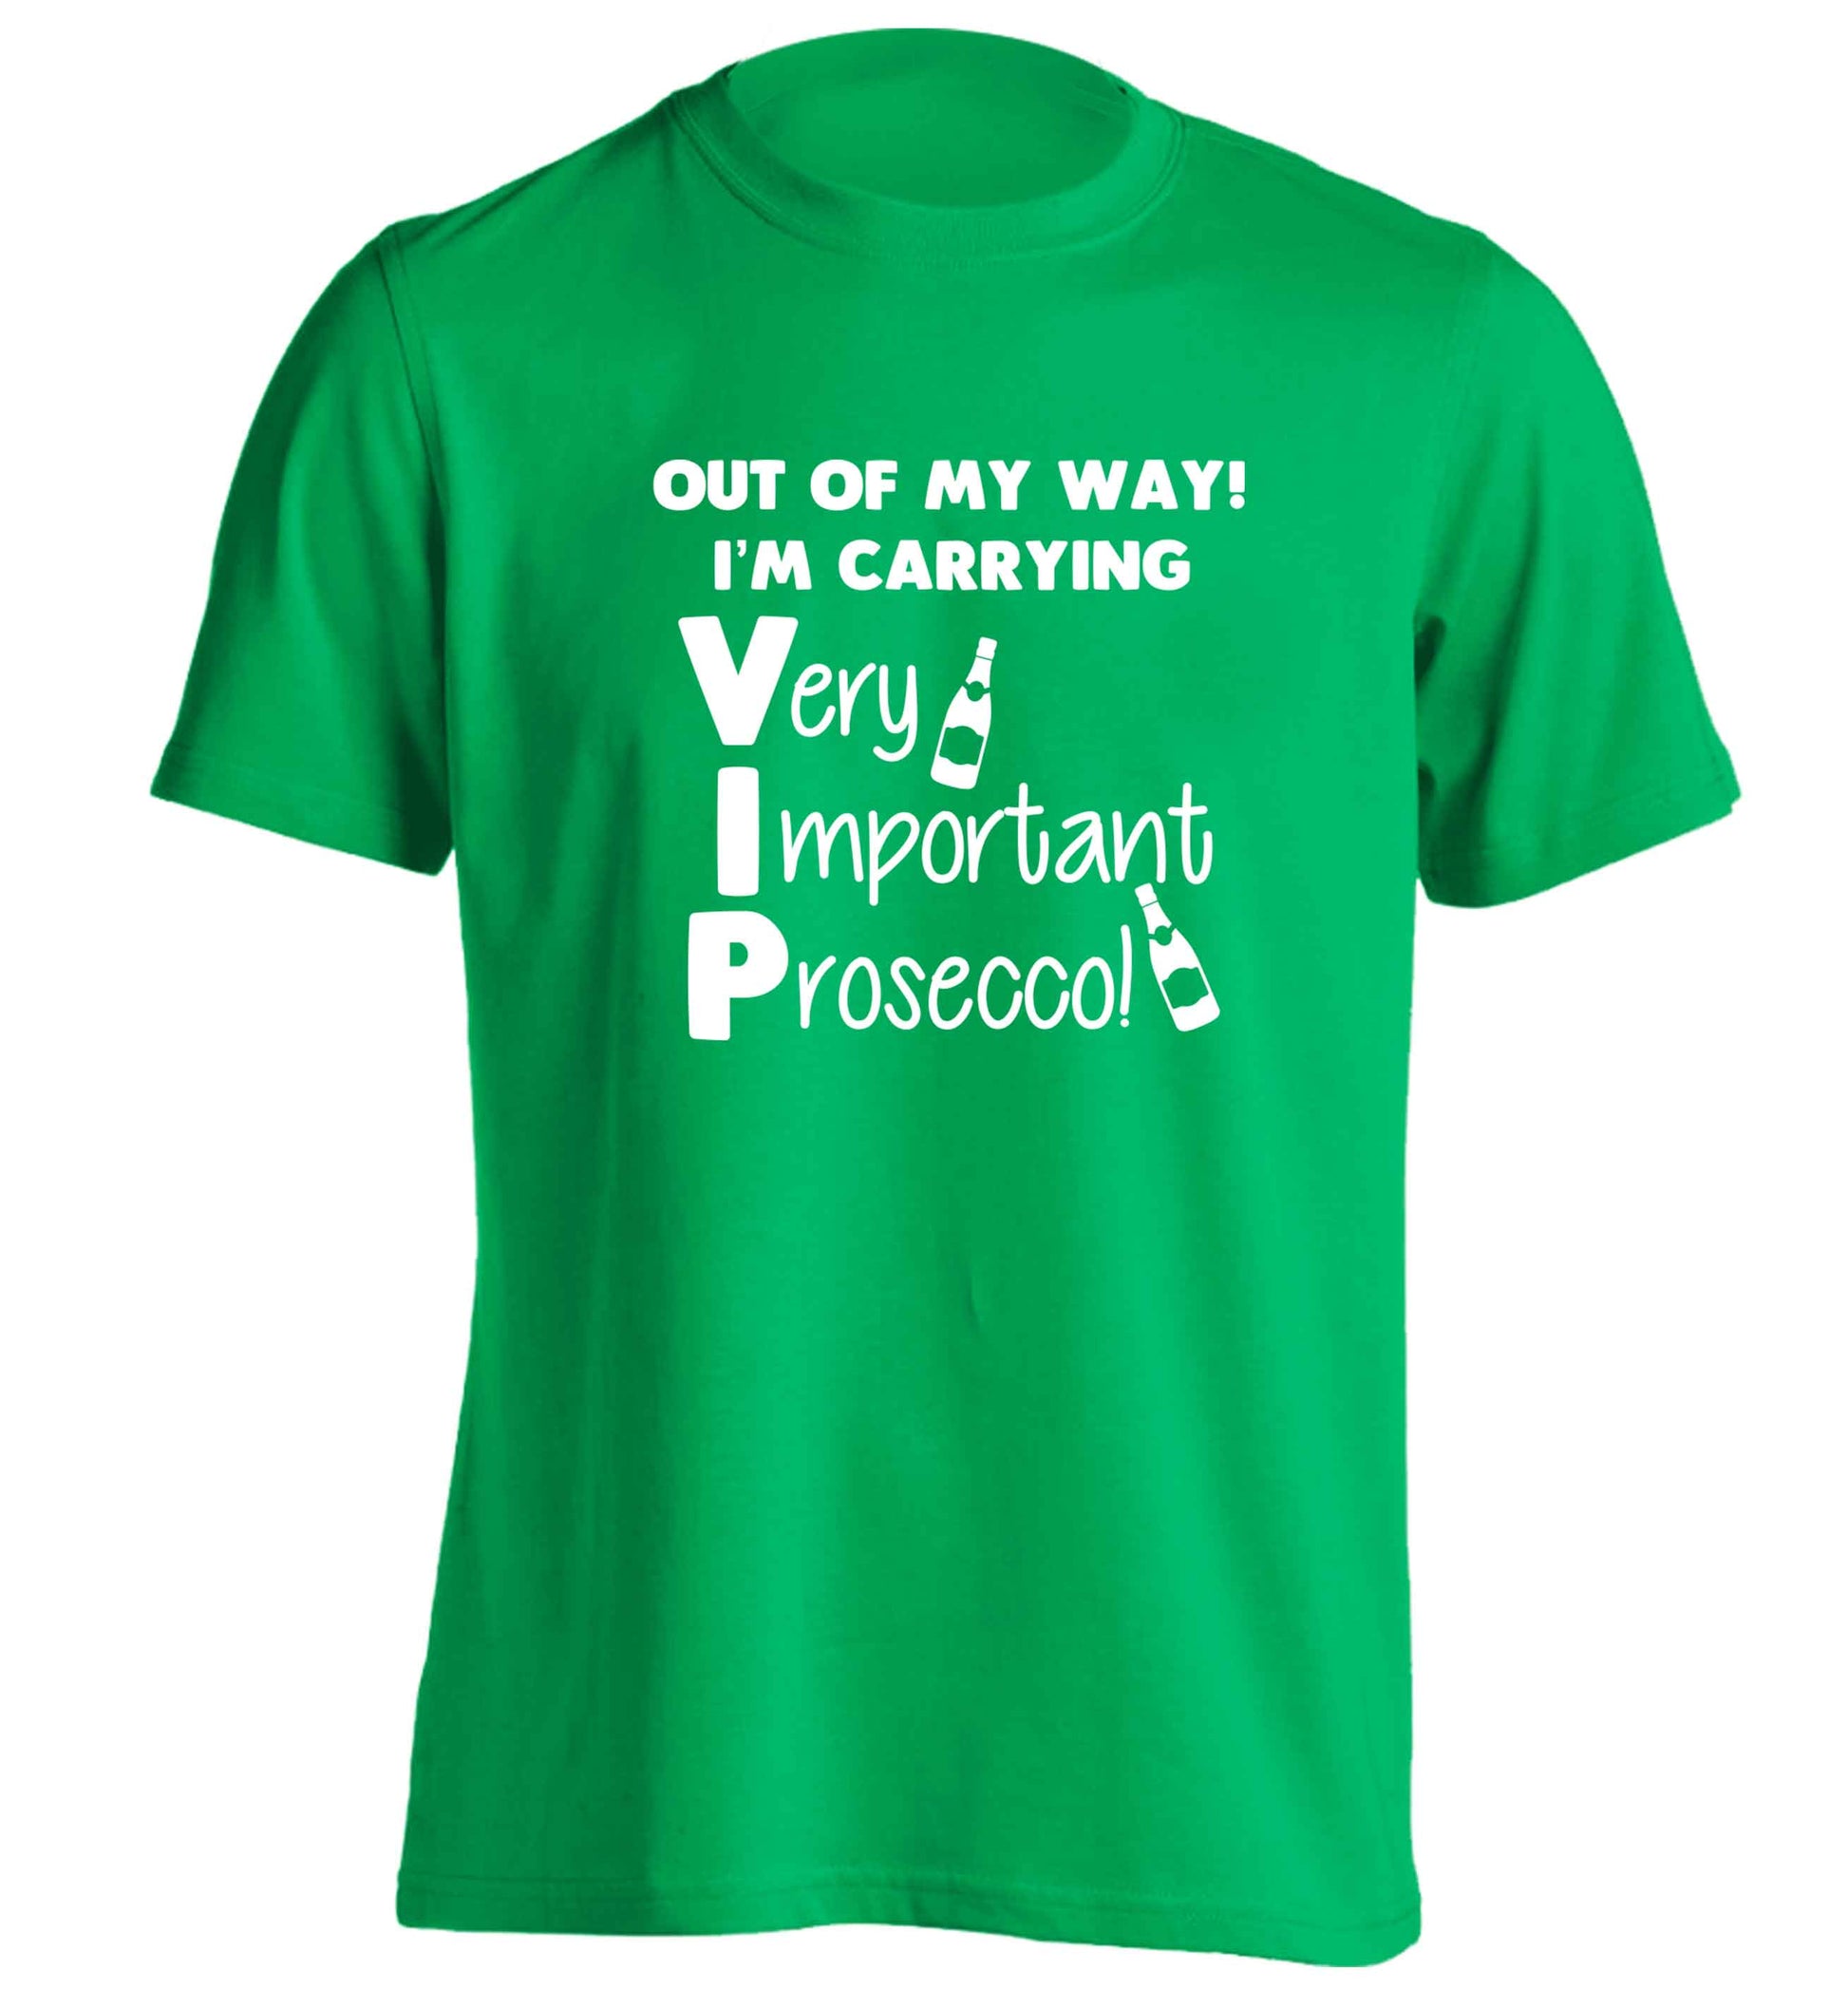 Out of my way I'm carrying very important prosecco! adults unisex green Tshirt 2XL